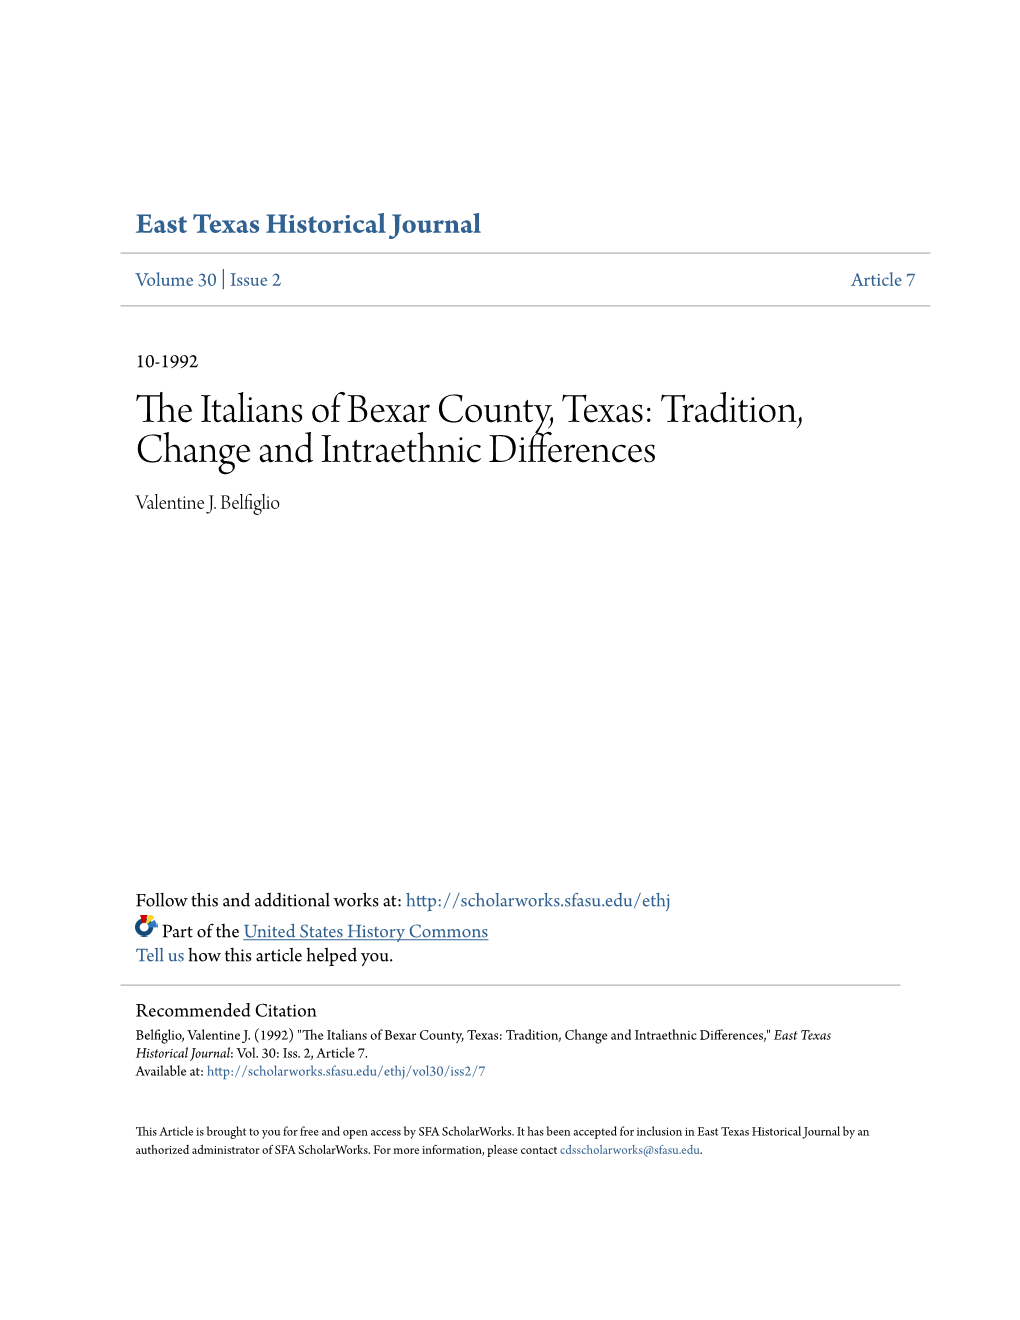 THE ITALIANS of BEXAR COUNTY, TEXAS: TRADITION, CHANGE and INTRAETHNIC DIFFERENCES by Valentine J